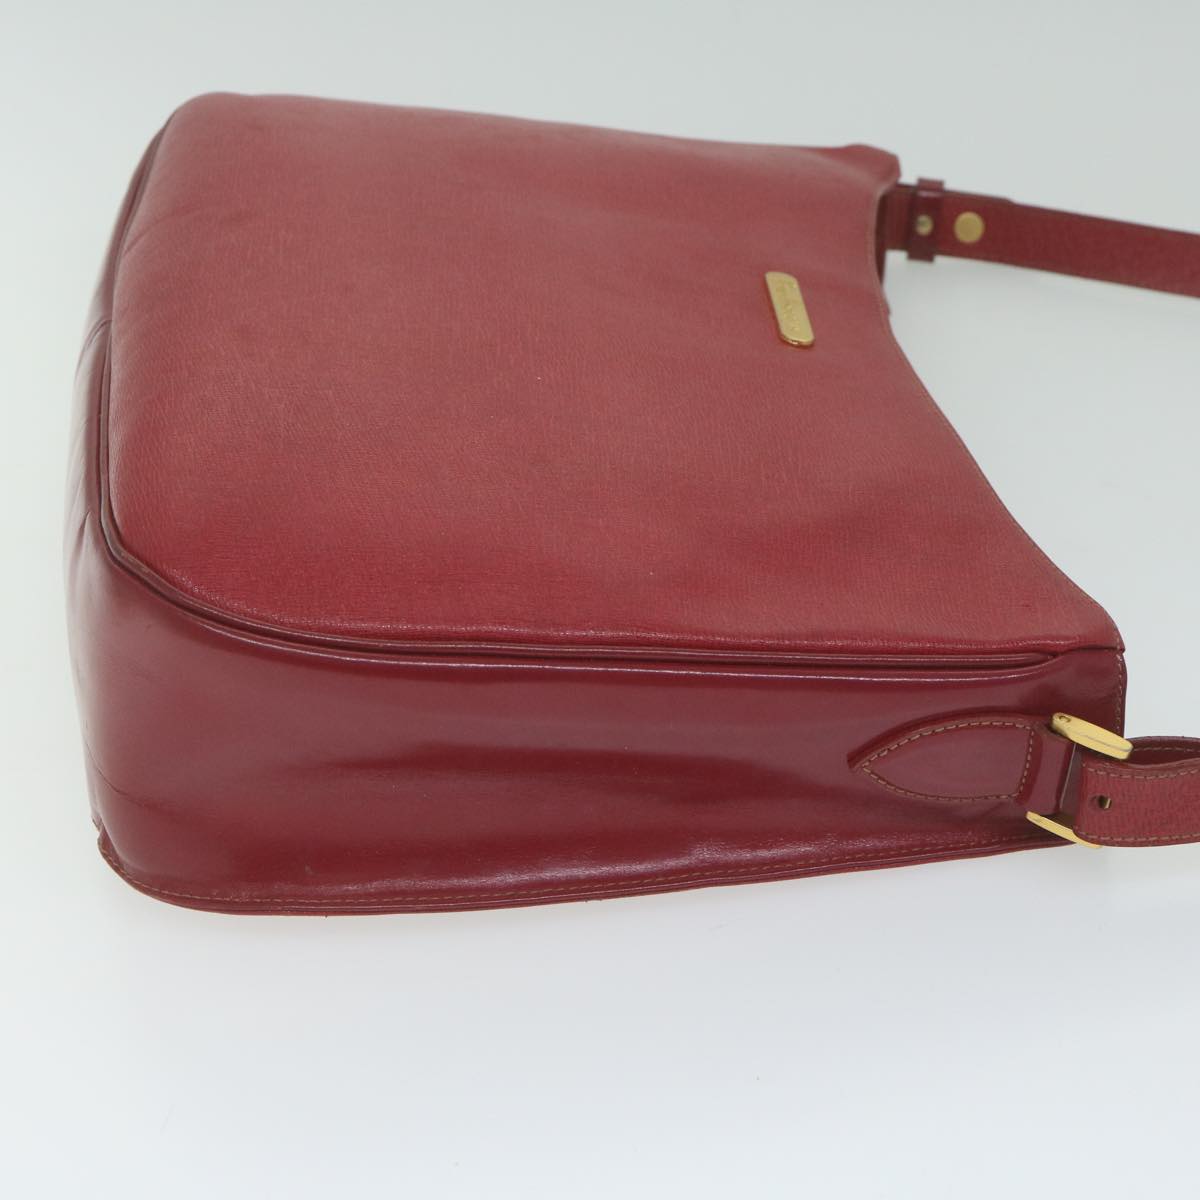 Burberrys Shoulder Bag Leather Red Auth bs10914